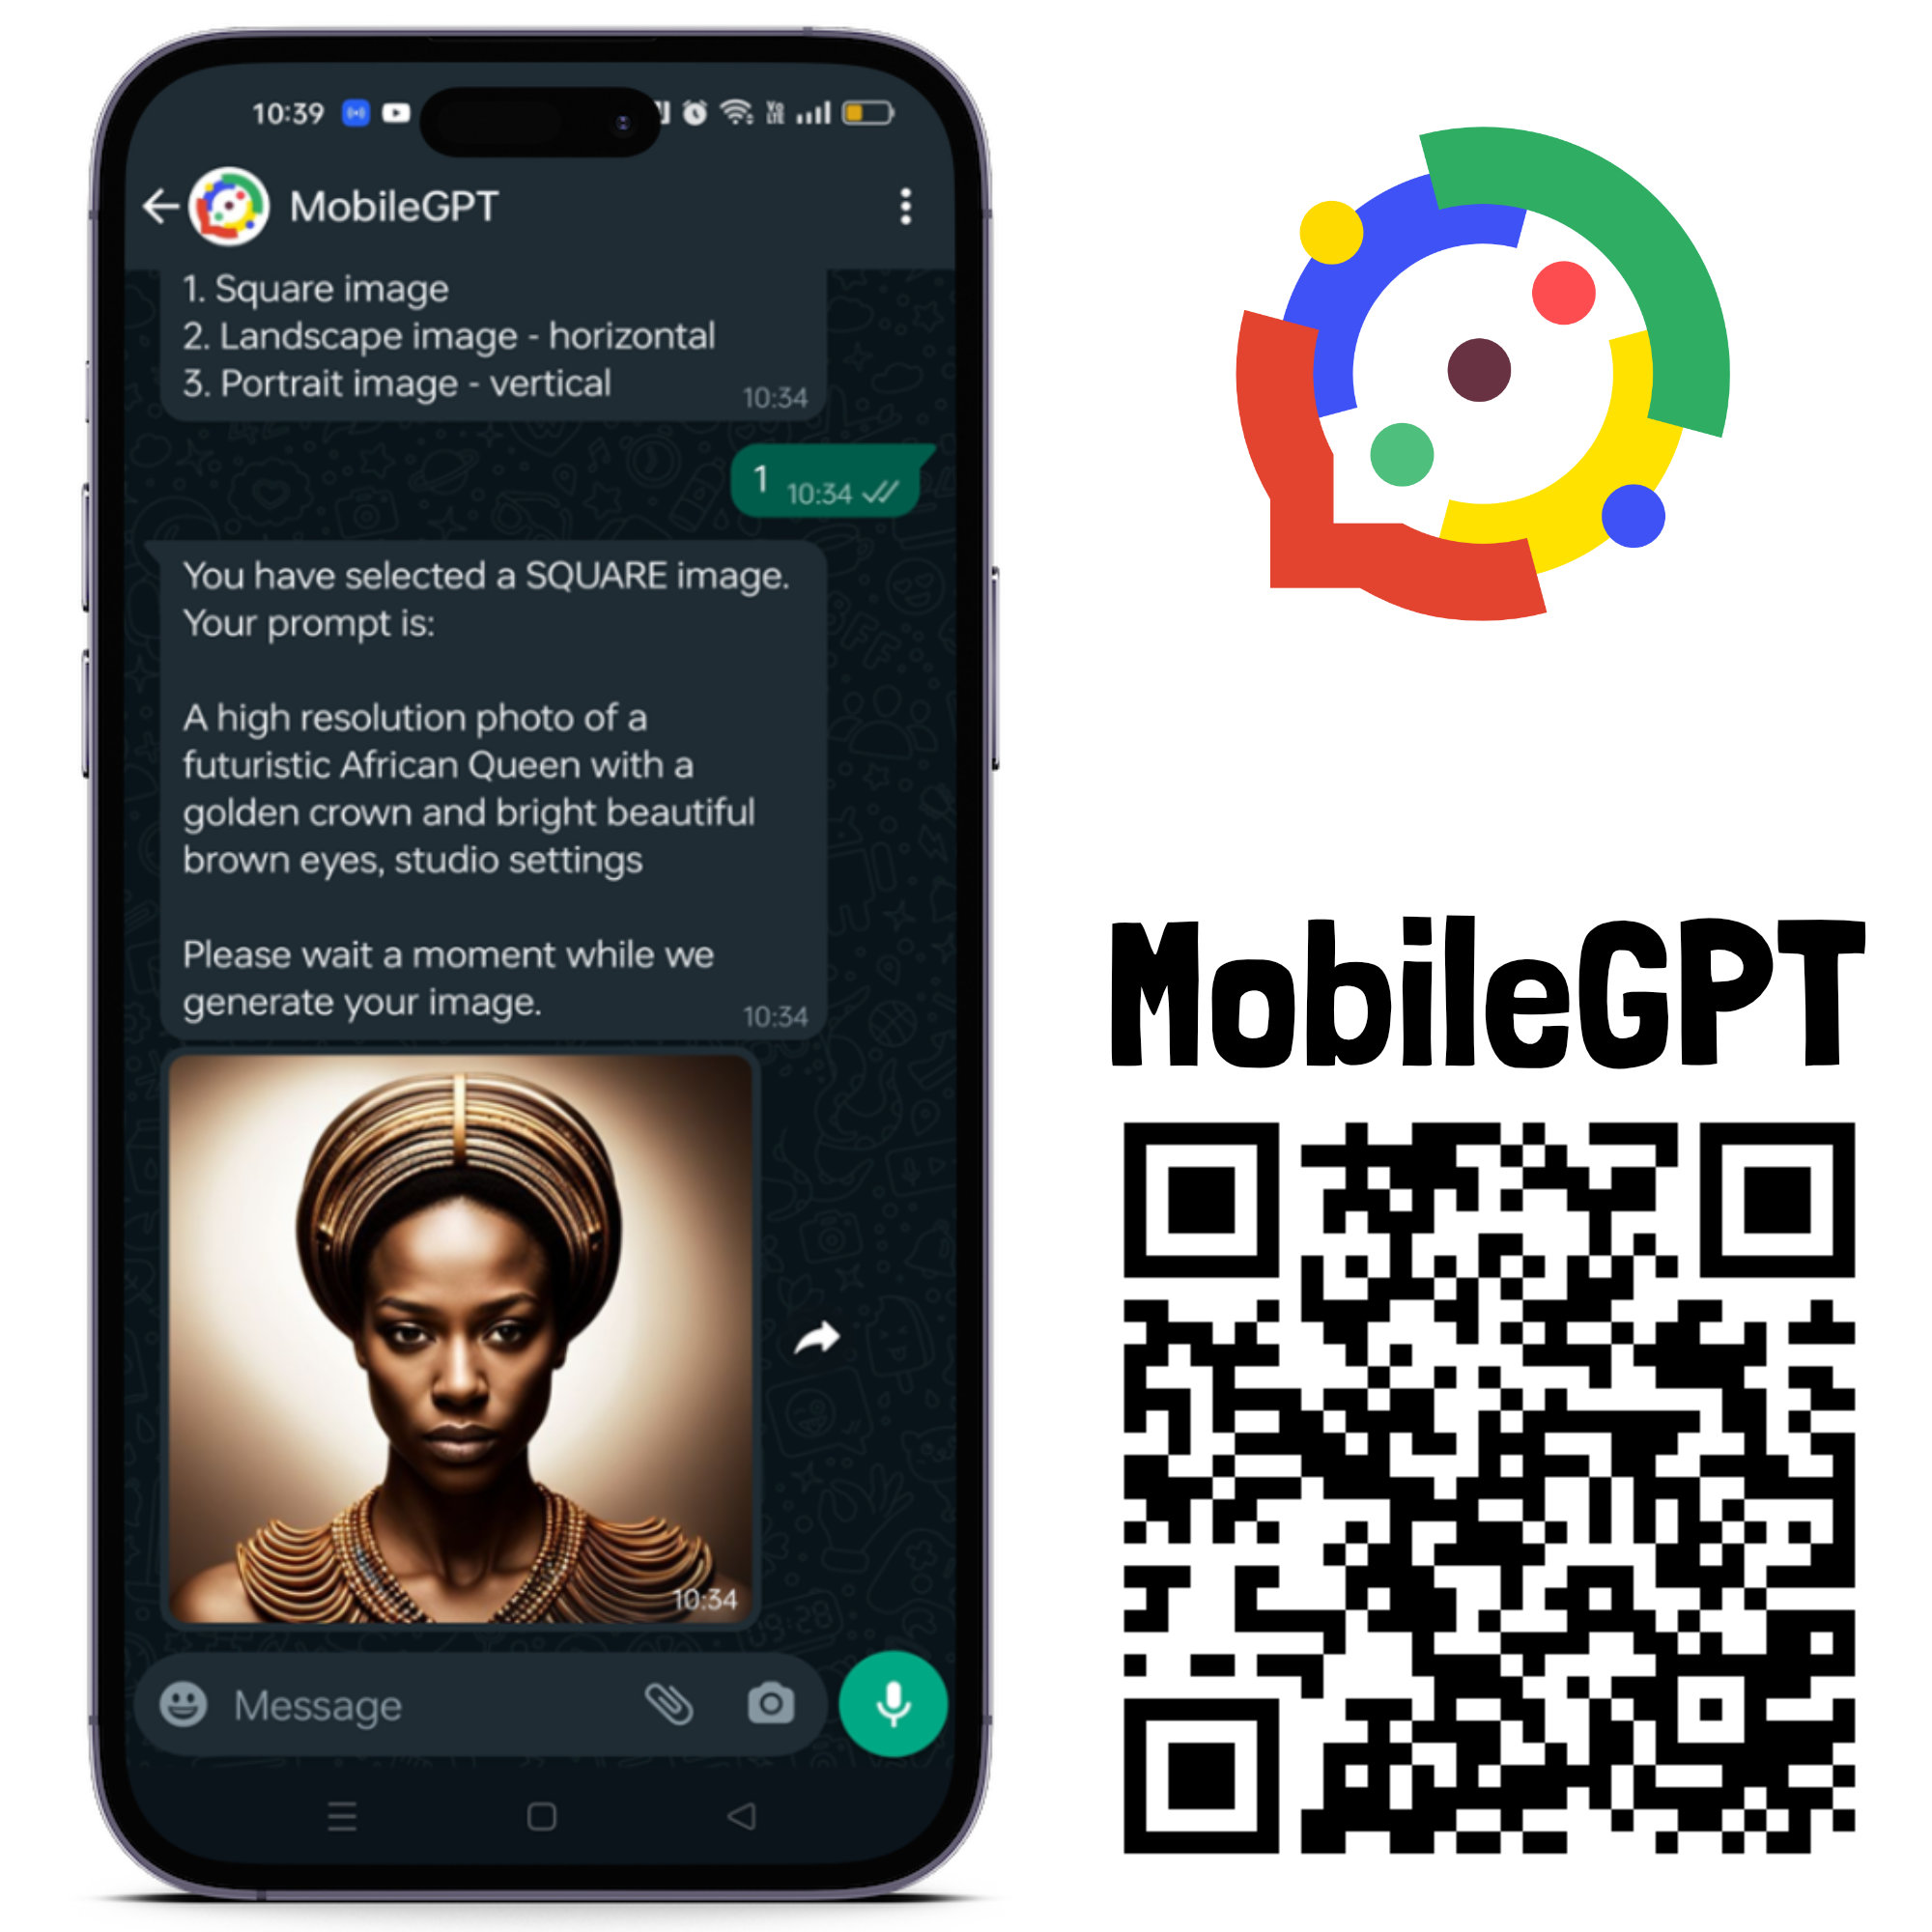 Get started with MobileGPT on WhatsApp